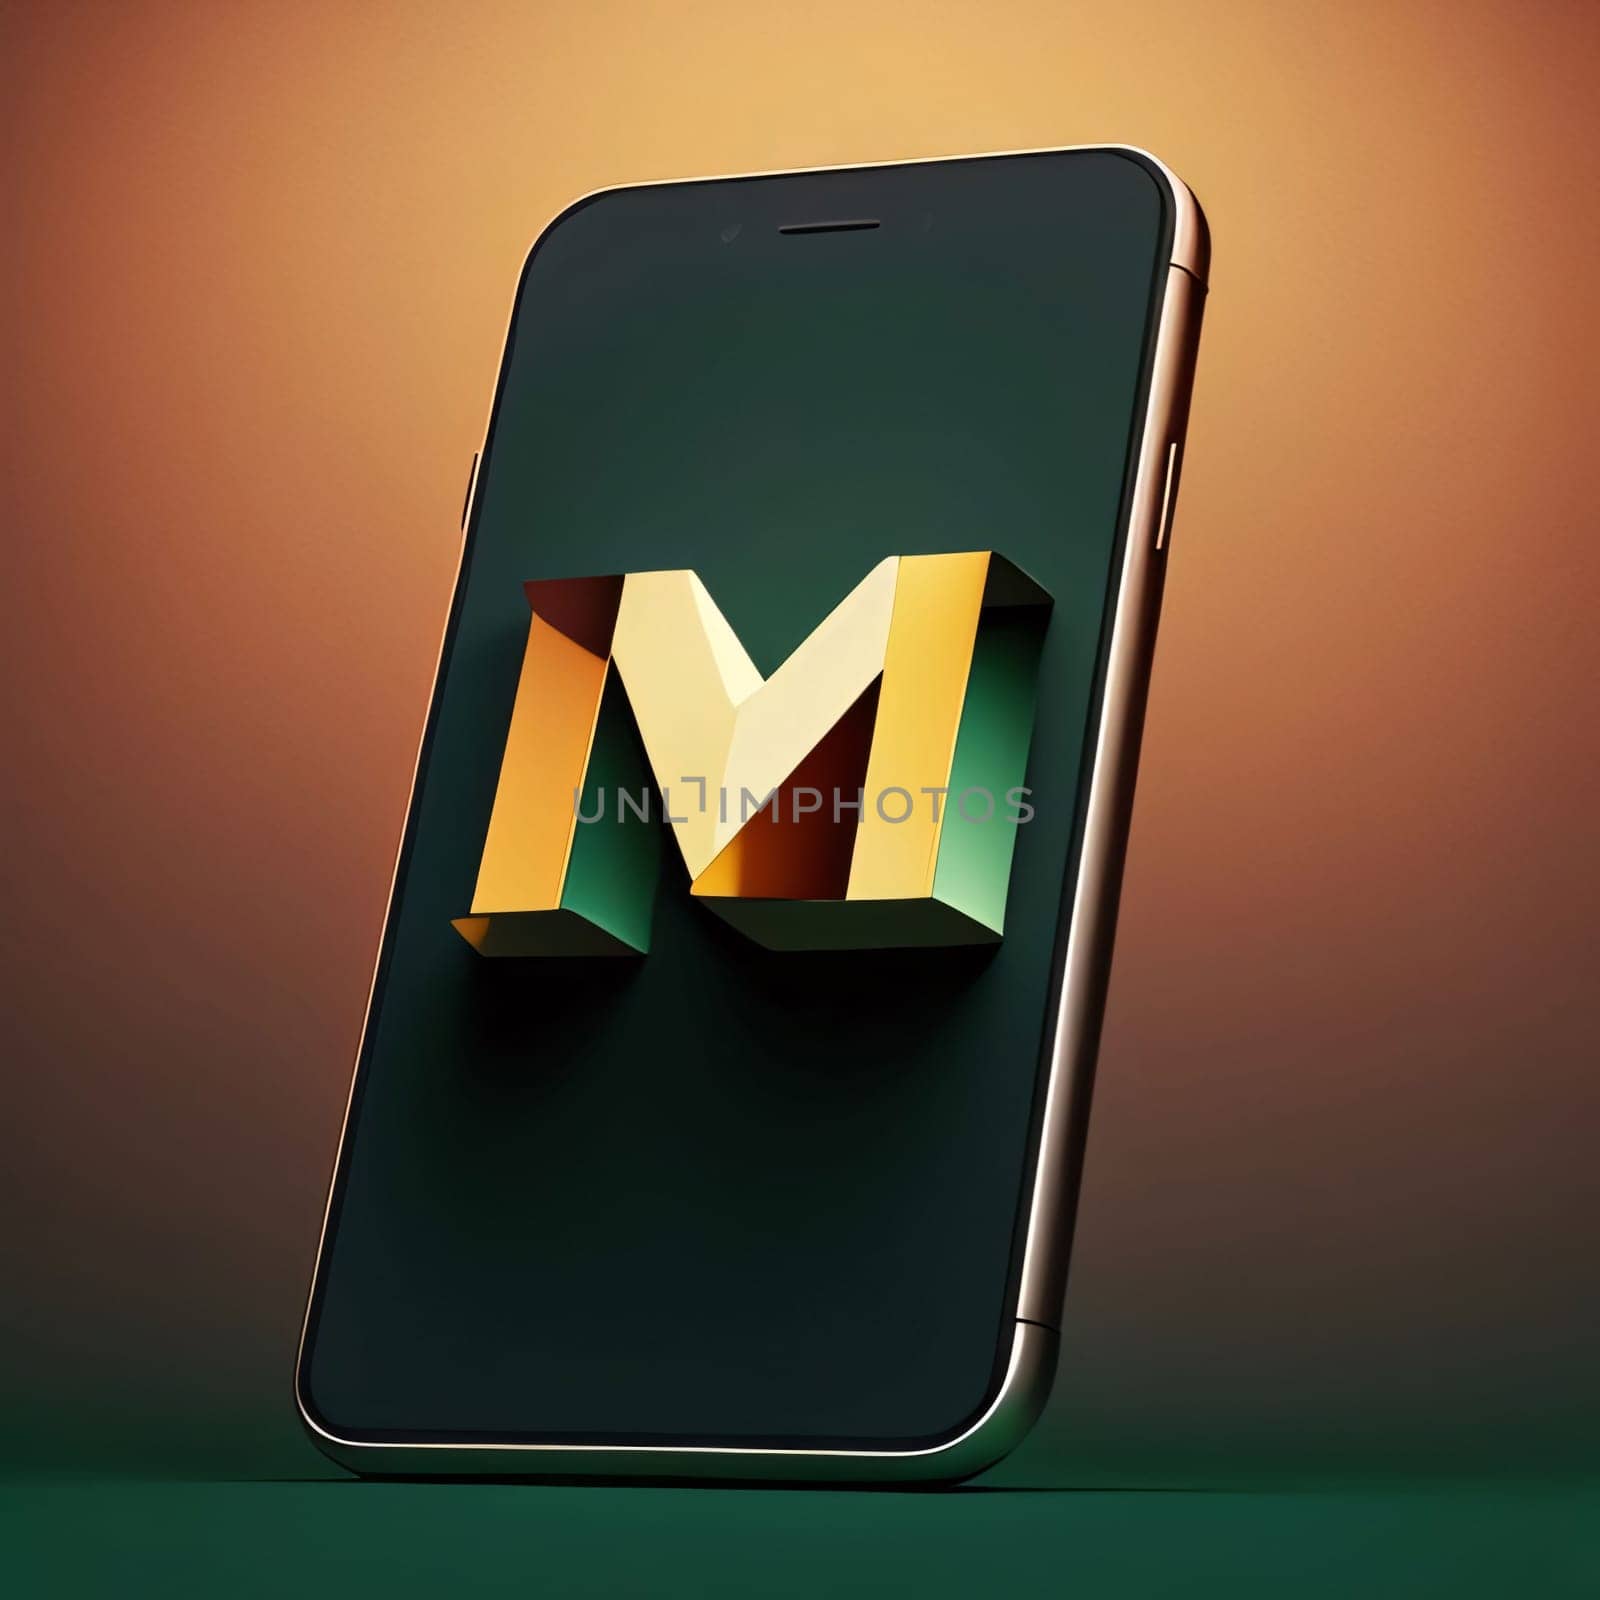 Graphic alphabet letters: Mobile phone with letter M on the screen. 3D illustration.